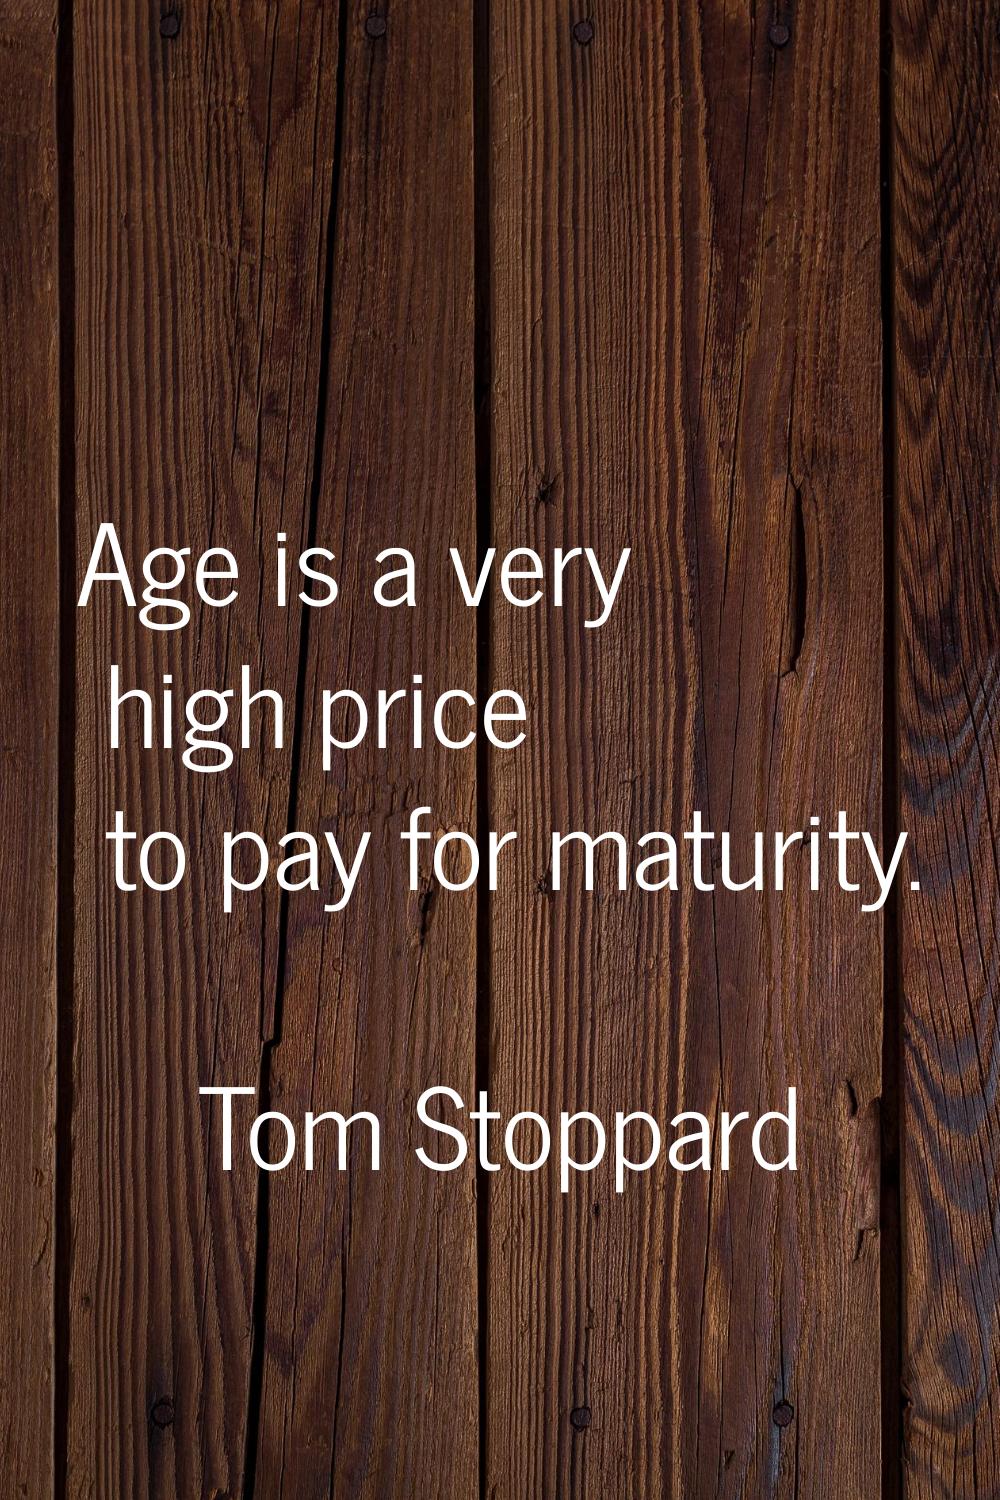 Age is a very high price to pay for maturity.